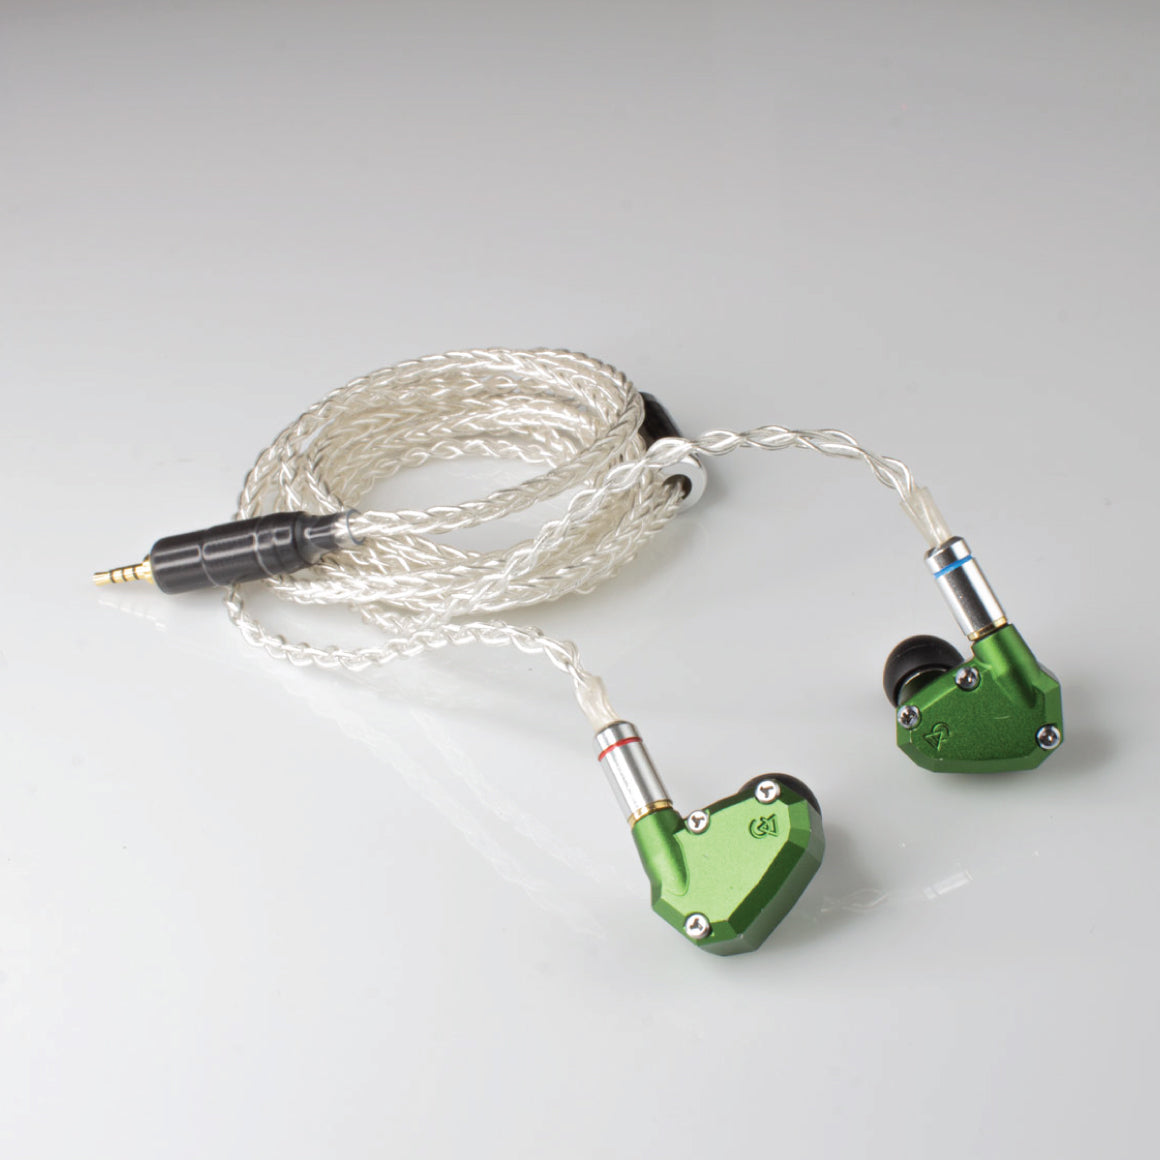 Headphone Zone - Balanced MMCX Cable for IEM